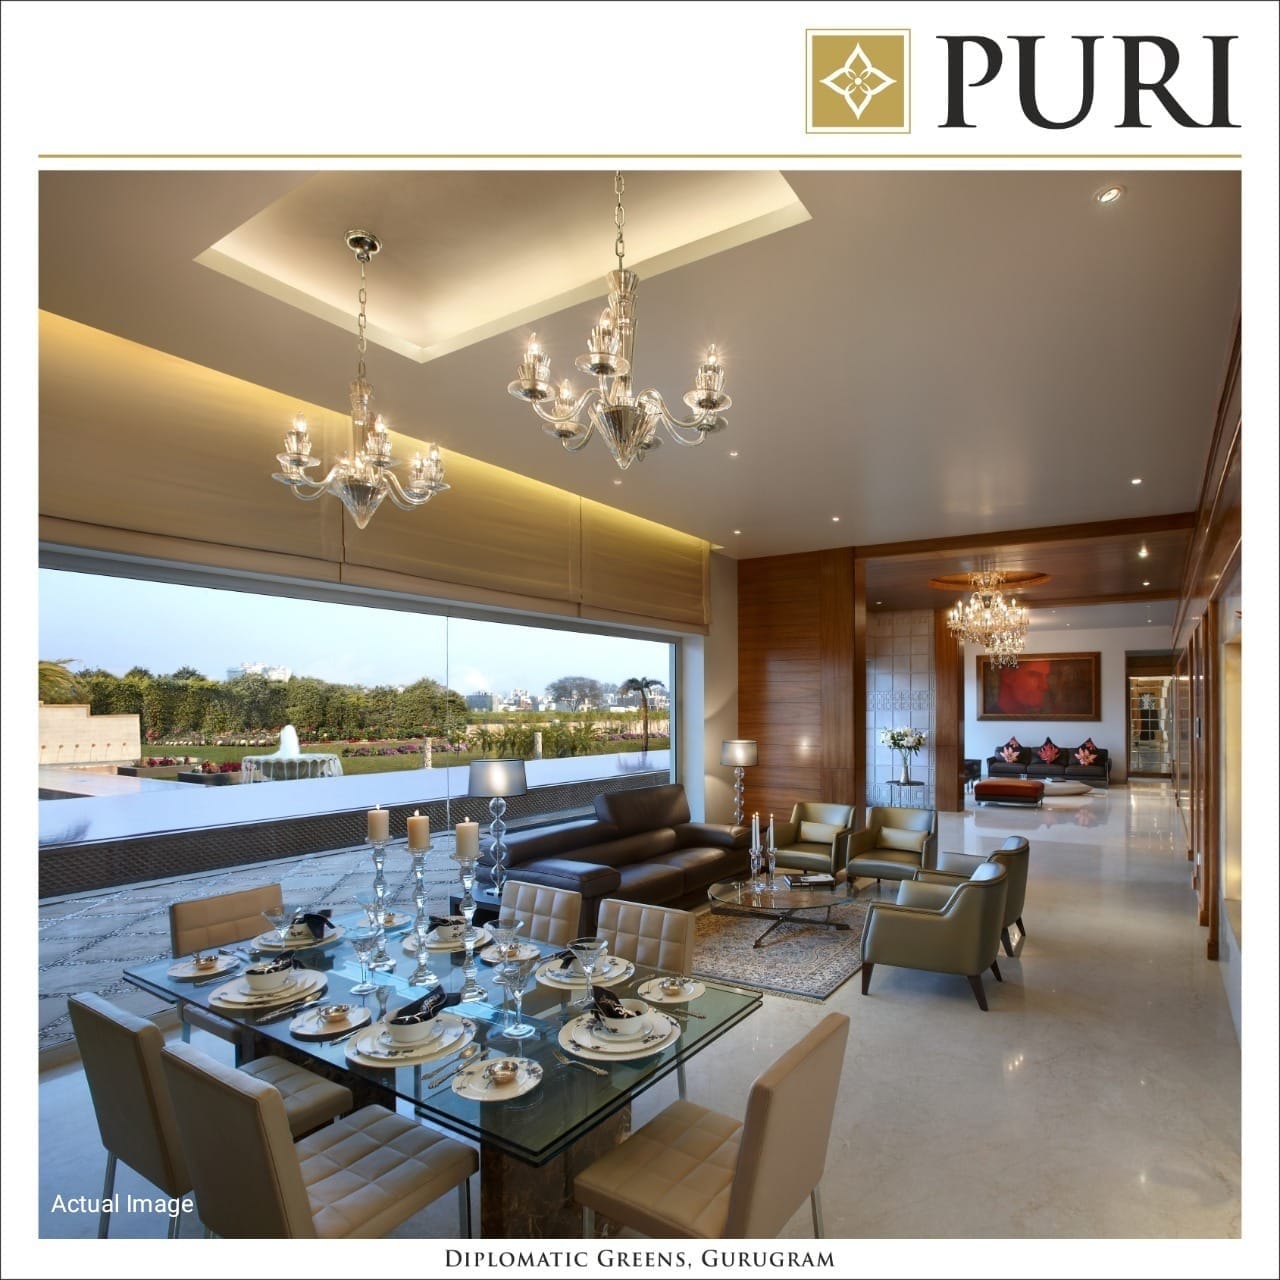 True luxury extends beyond the boundaries of your home at Puri Diplomatic Greens, Gurgaon